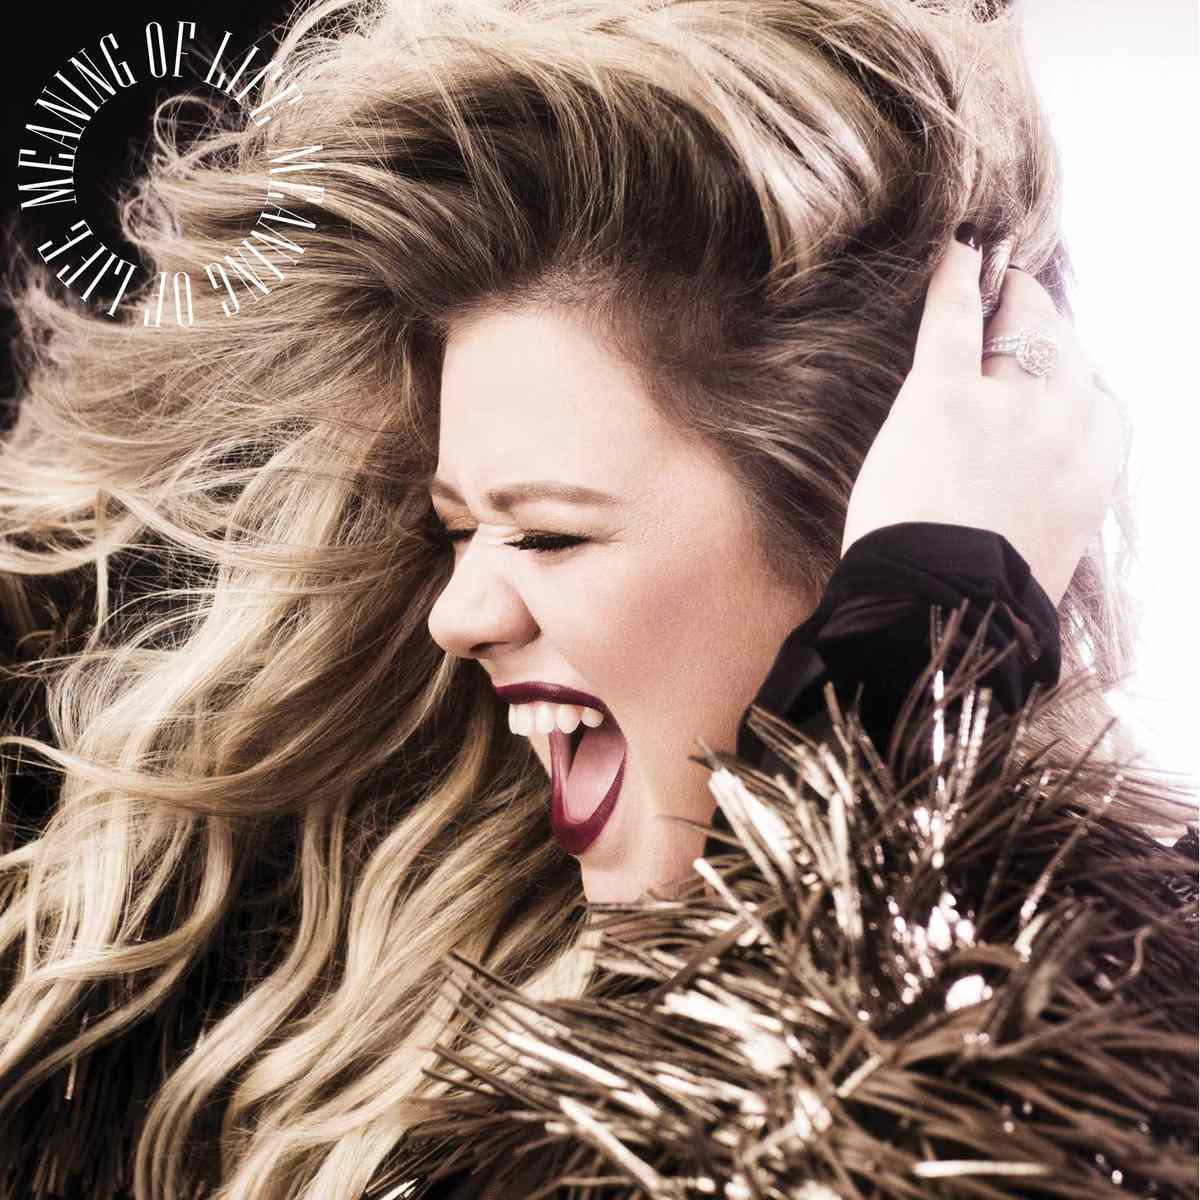 Kelly Clarkson: Meaning of Life